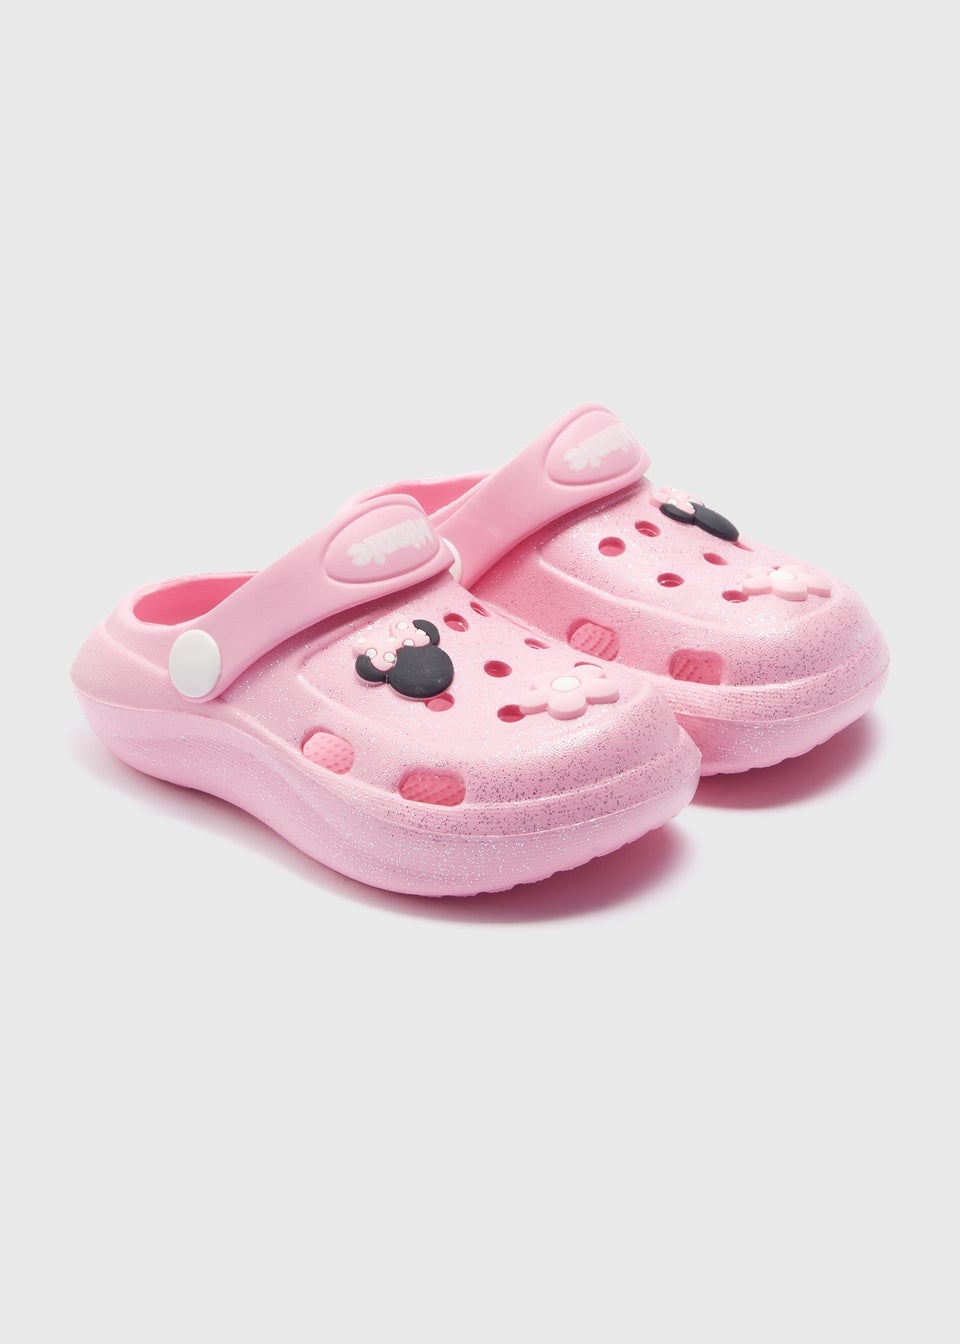 Disney Kids Pink Minnie Mouse Badge Clogs (Younger 4-12)